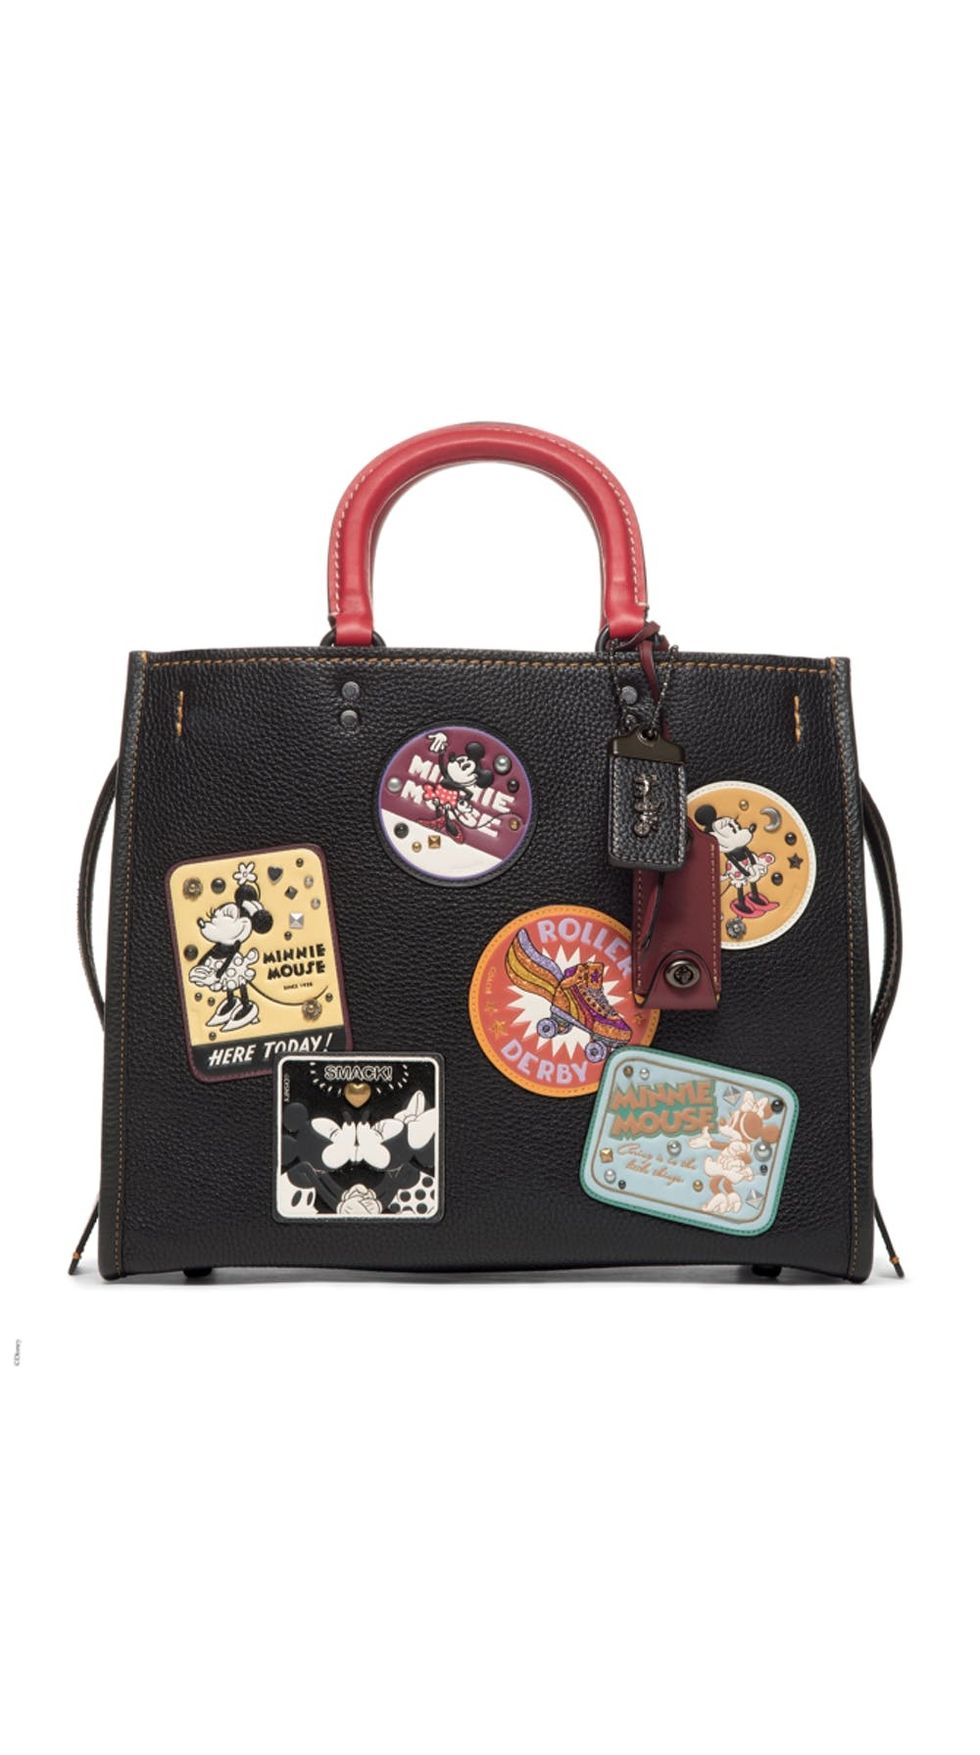 The New Coach Minnie Mouse Line Is Everything You Want It to Be - Brit + Co